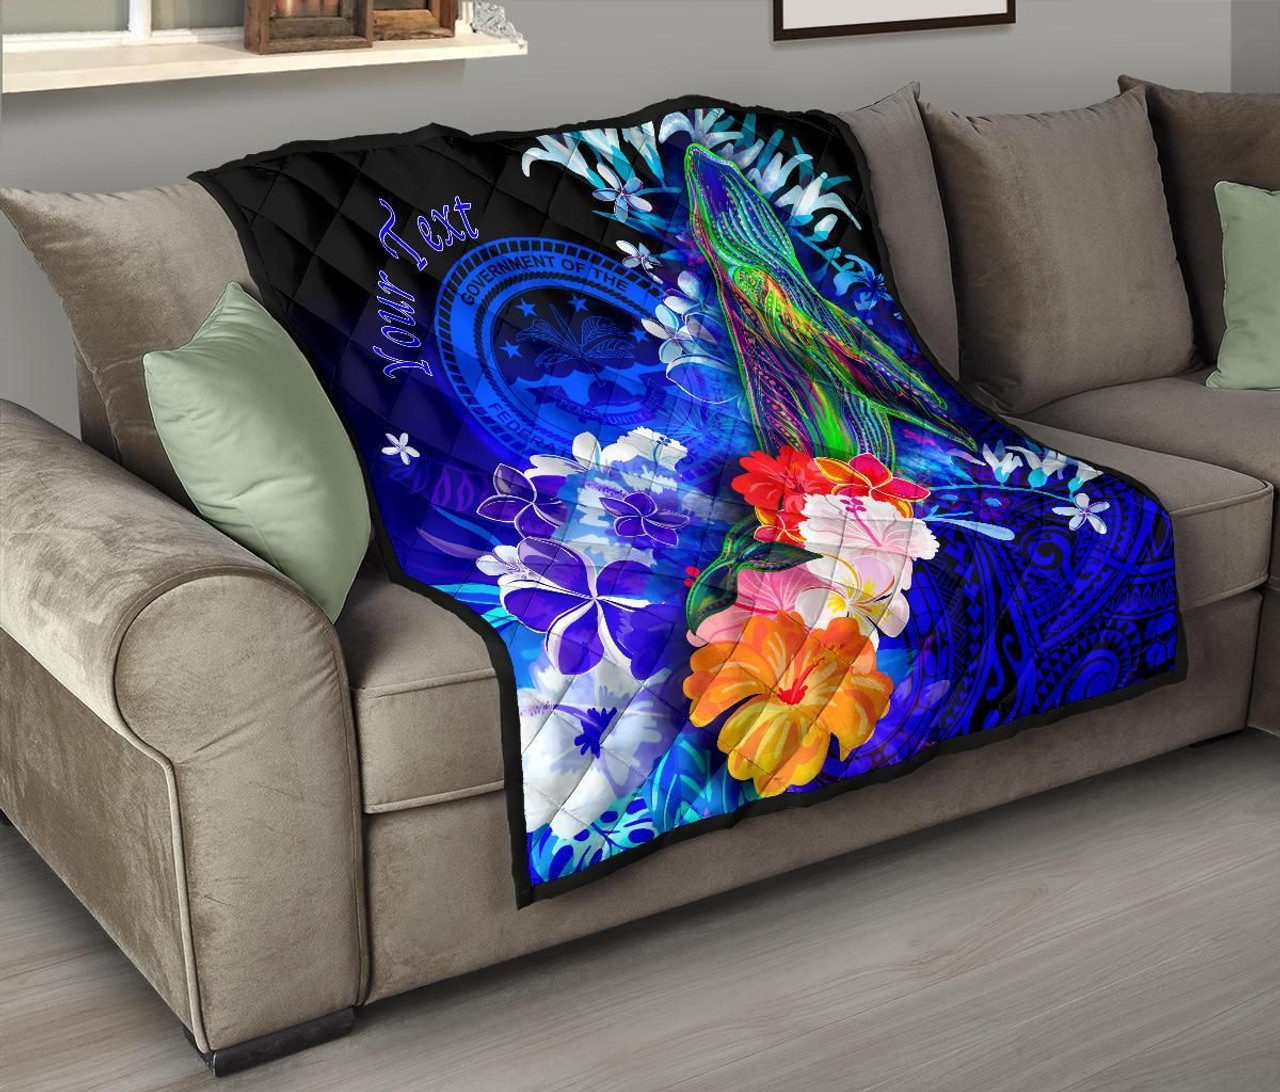 Federated States of Micronesia Custom Personalised Premium Quilt - Humpback Whale with Tropical Flowers (Blue) 9